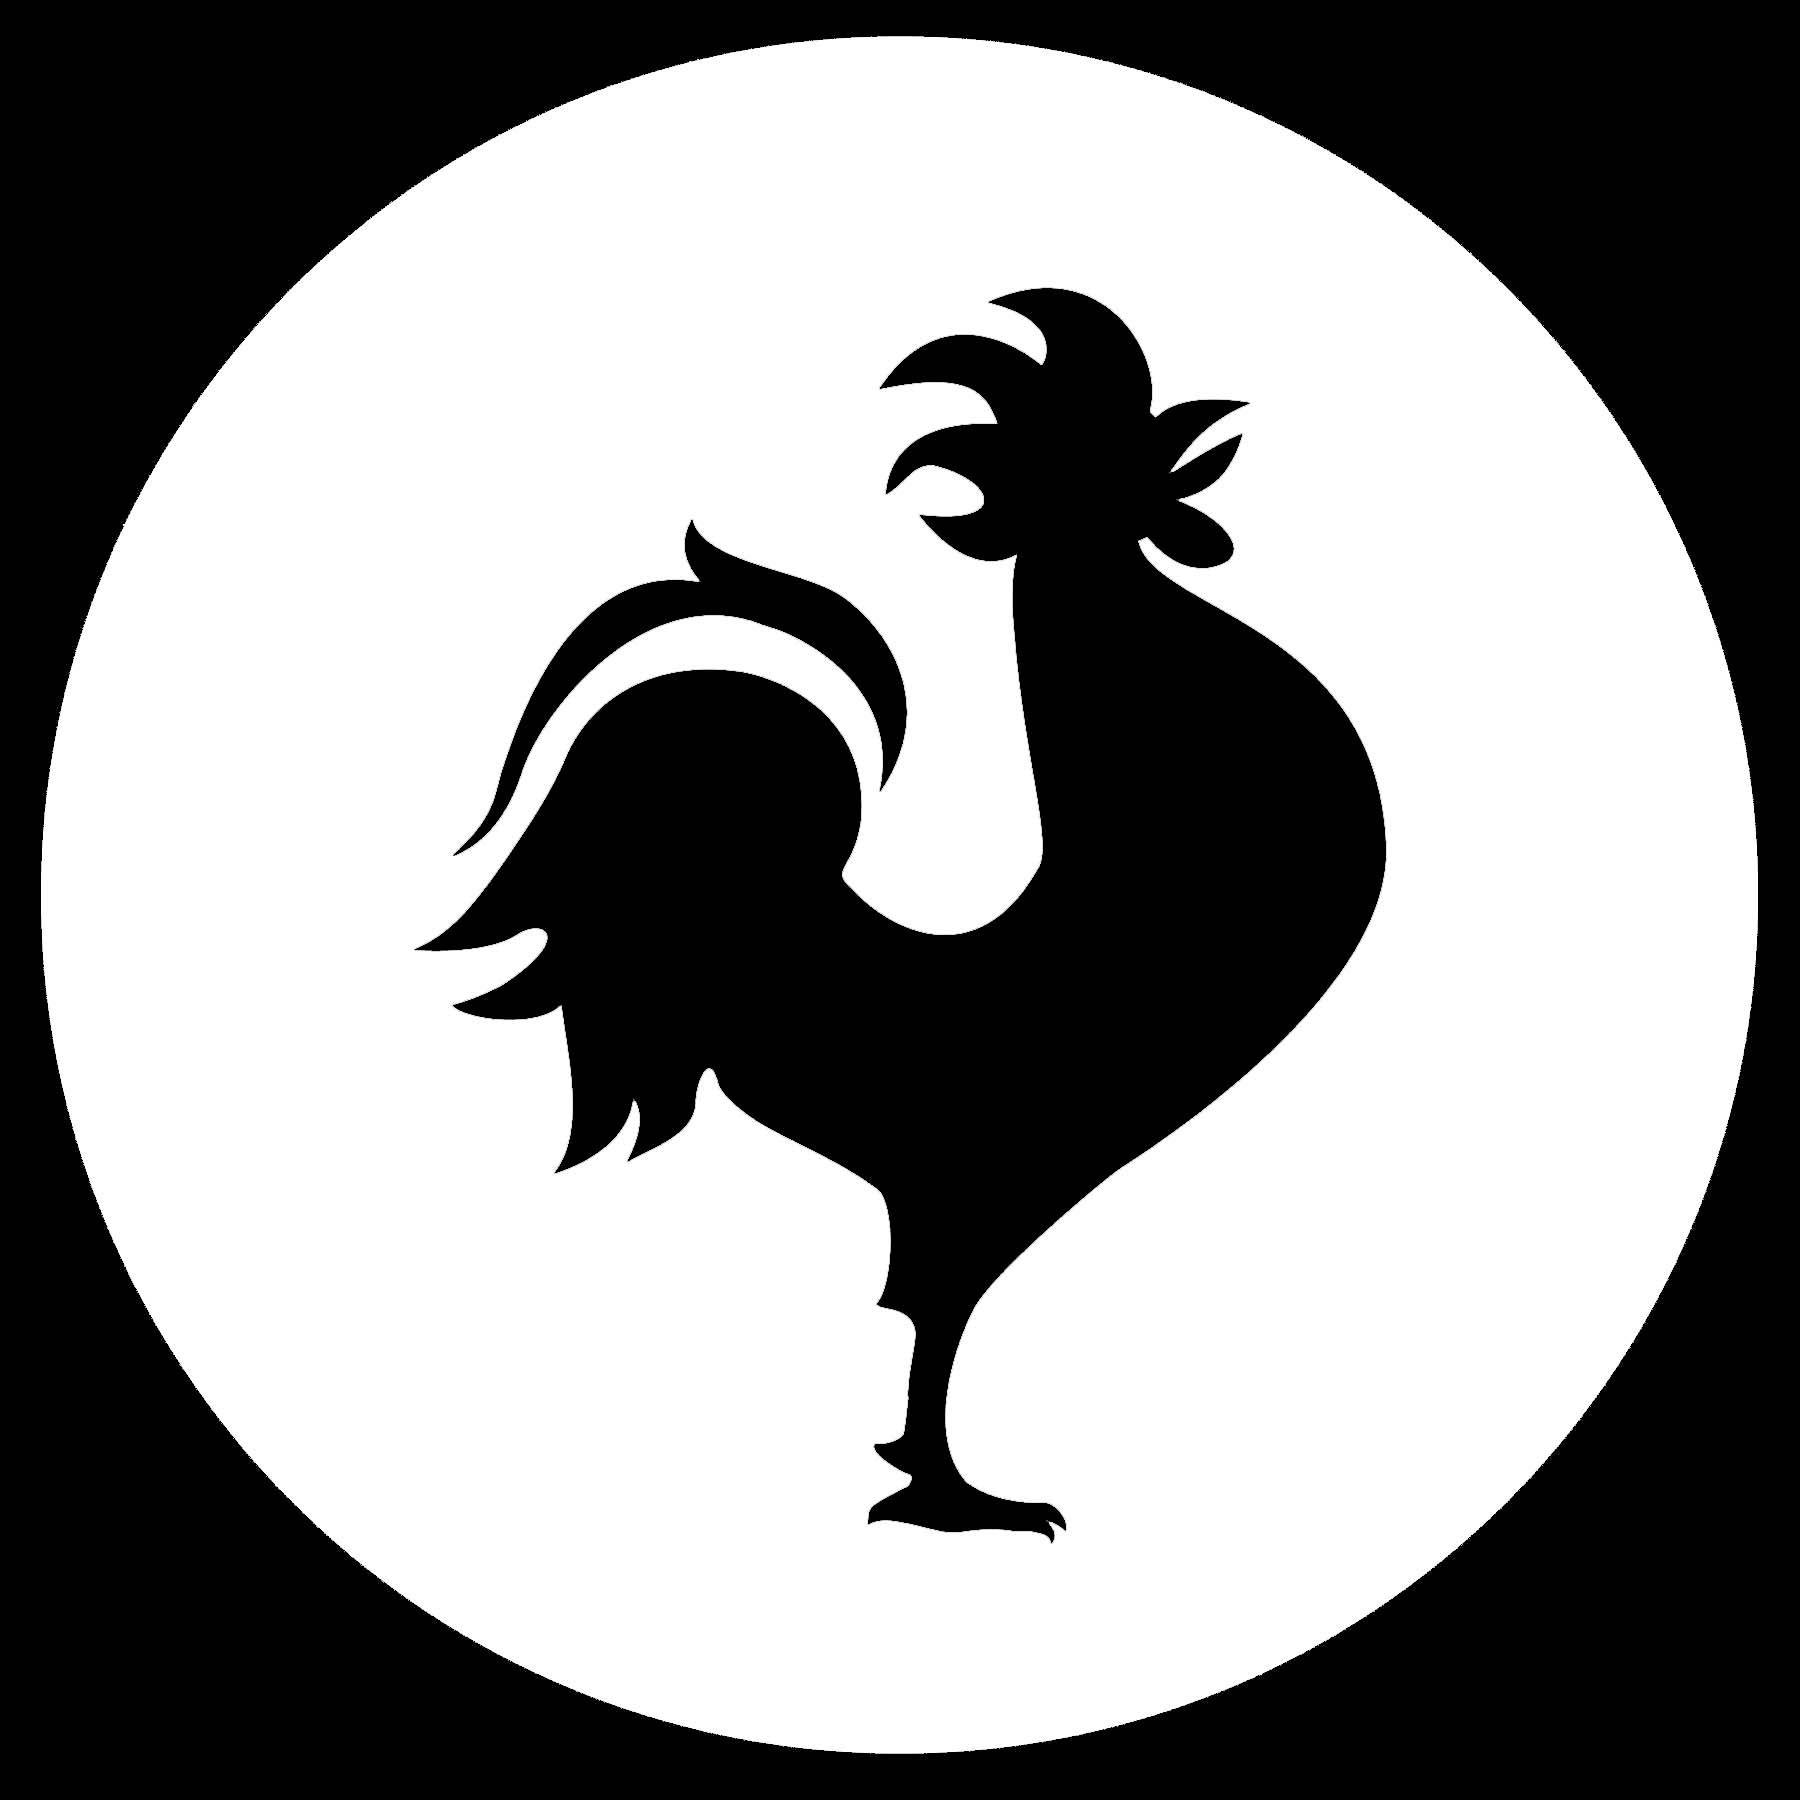 Black and White Rooster Logo - Black rooster Logos